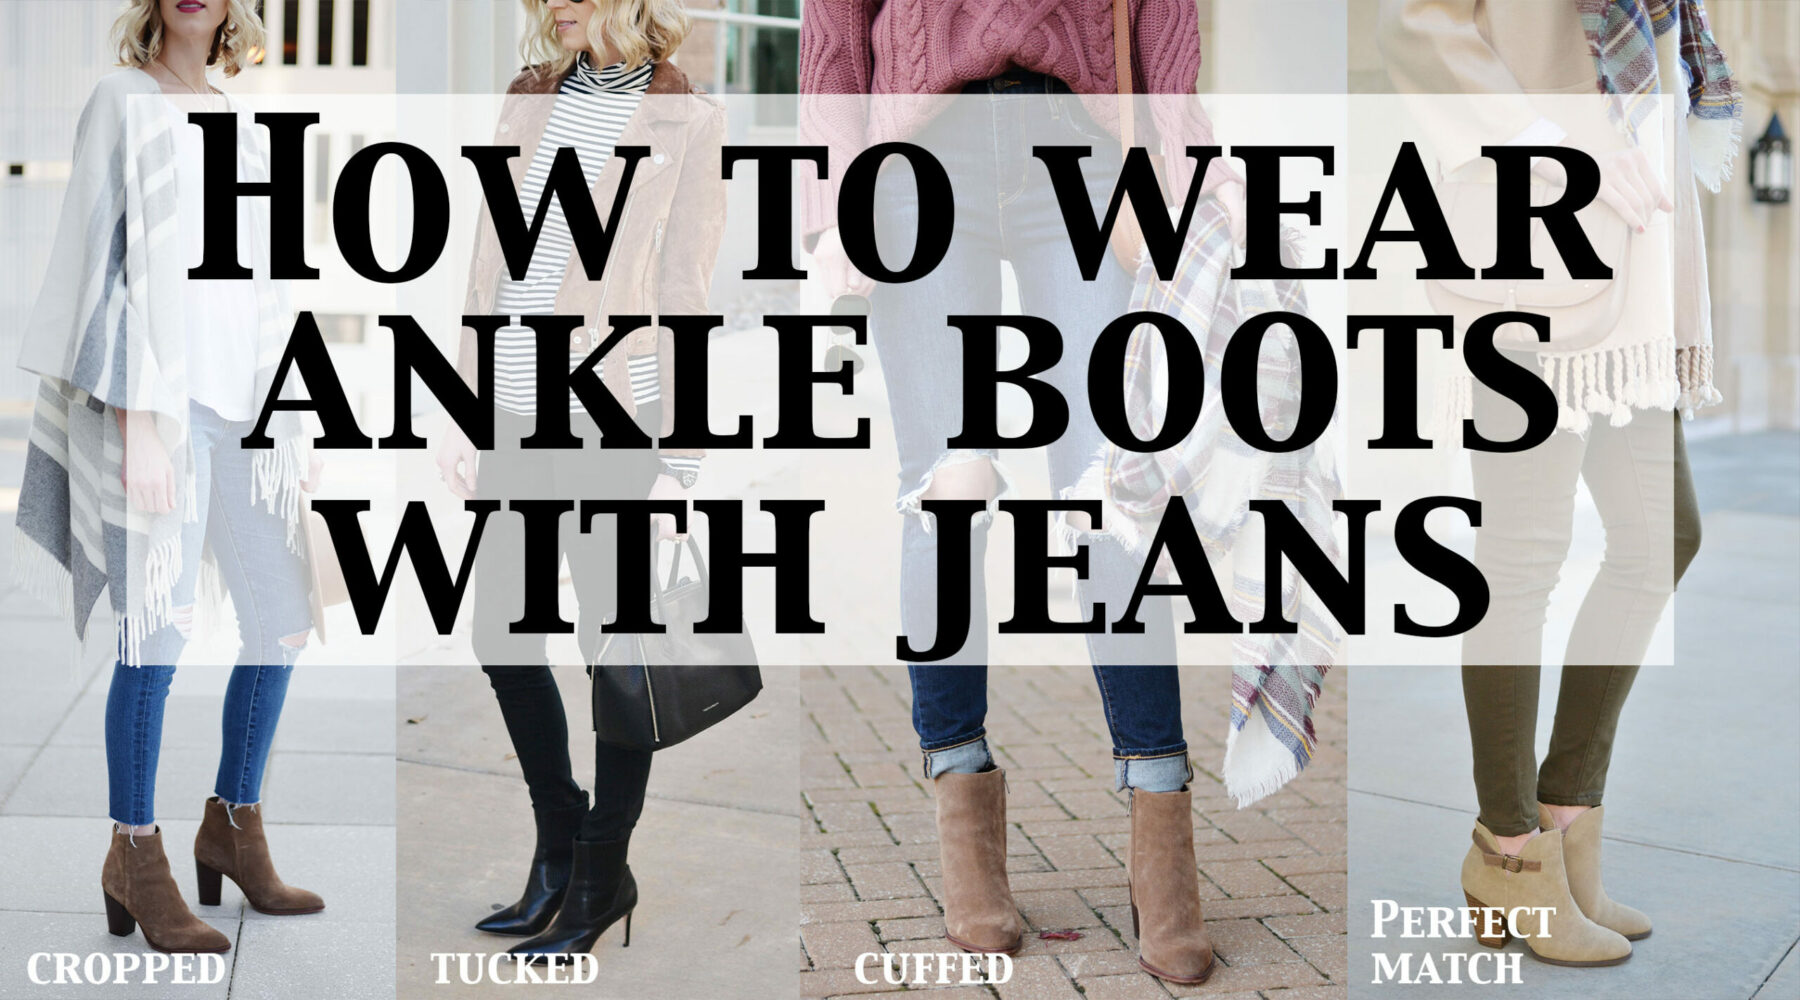 footwear for ankle length jeans